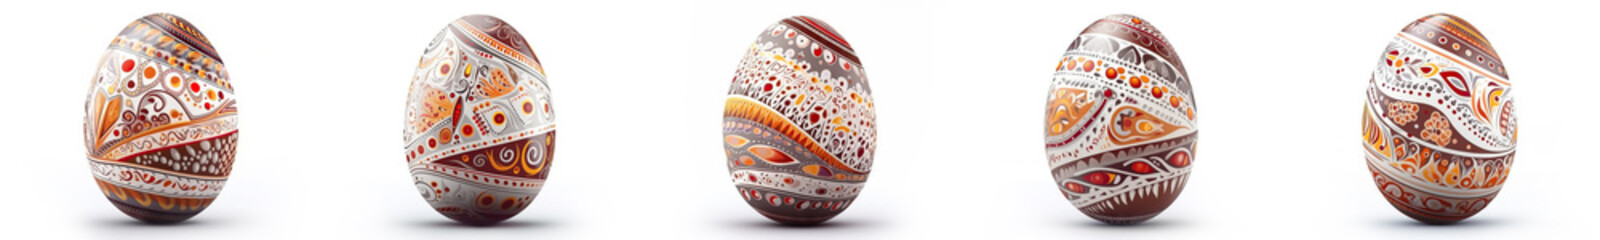 Colorfully decorated Easter eggs with patterns displayed and folk patterns in red-yellow-white-gray colors, isolate on a white background